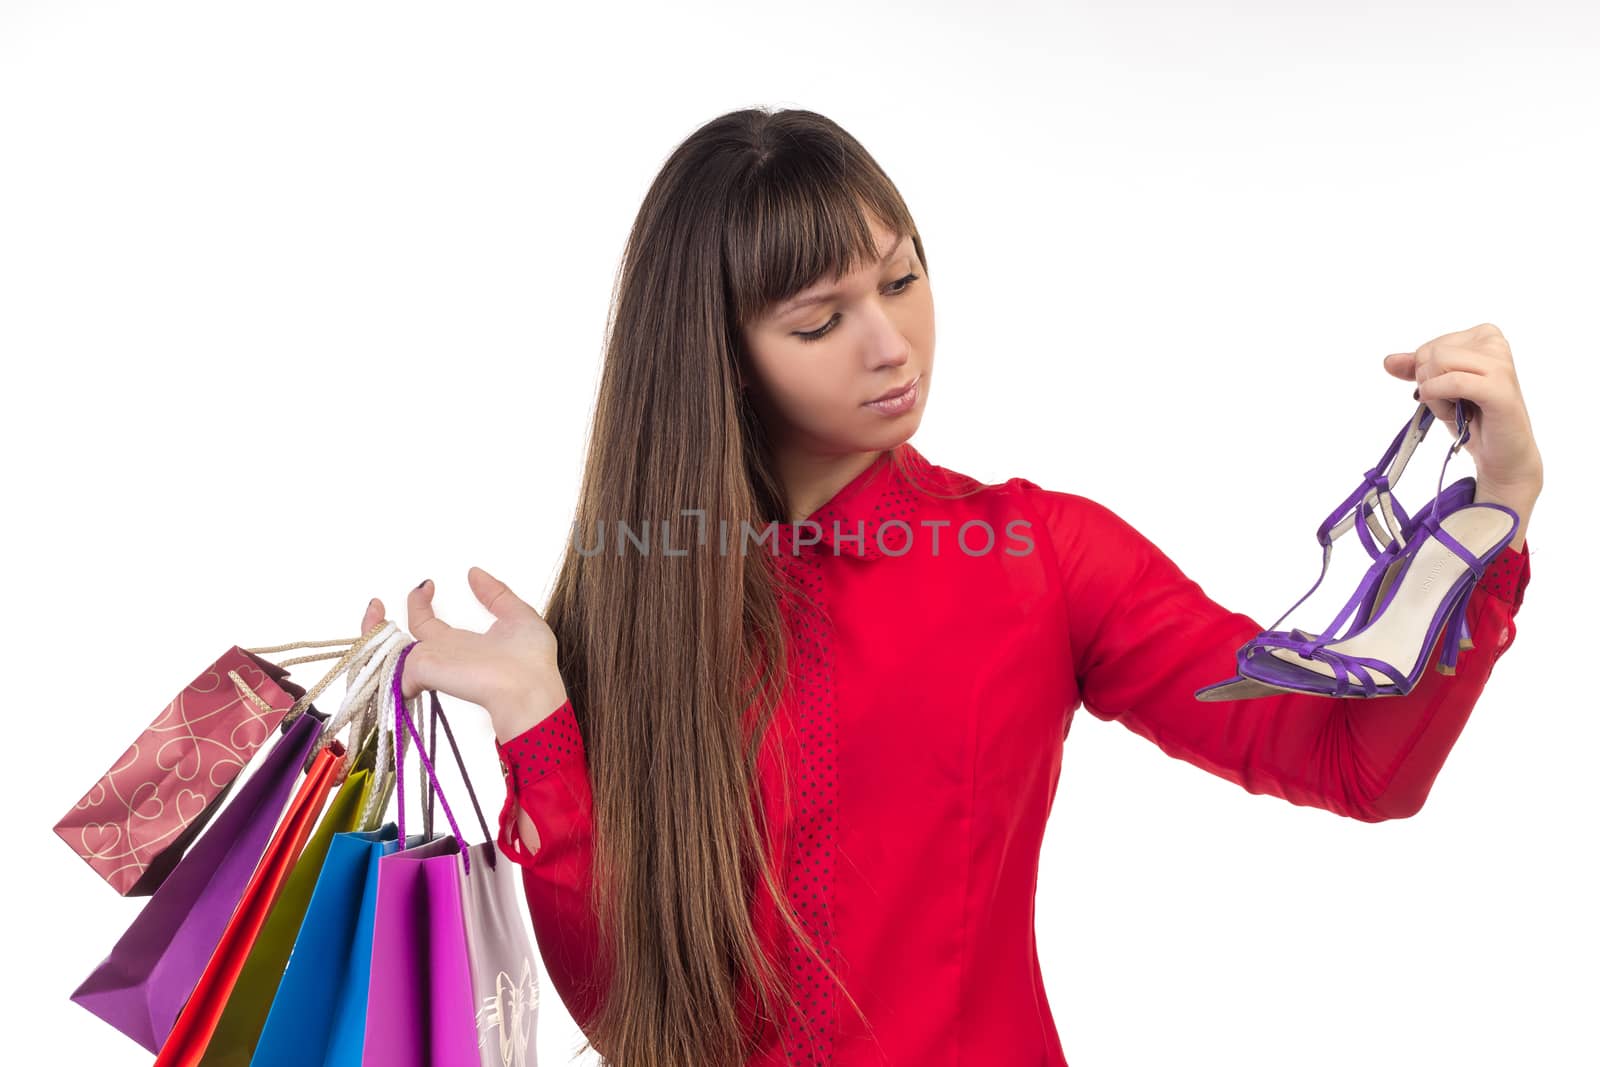 Young long-haired woman holds her purchases, many colorful paper bags, packages, and shoes in her hands after shopping